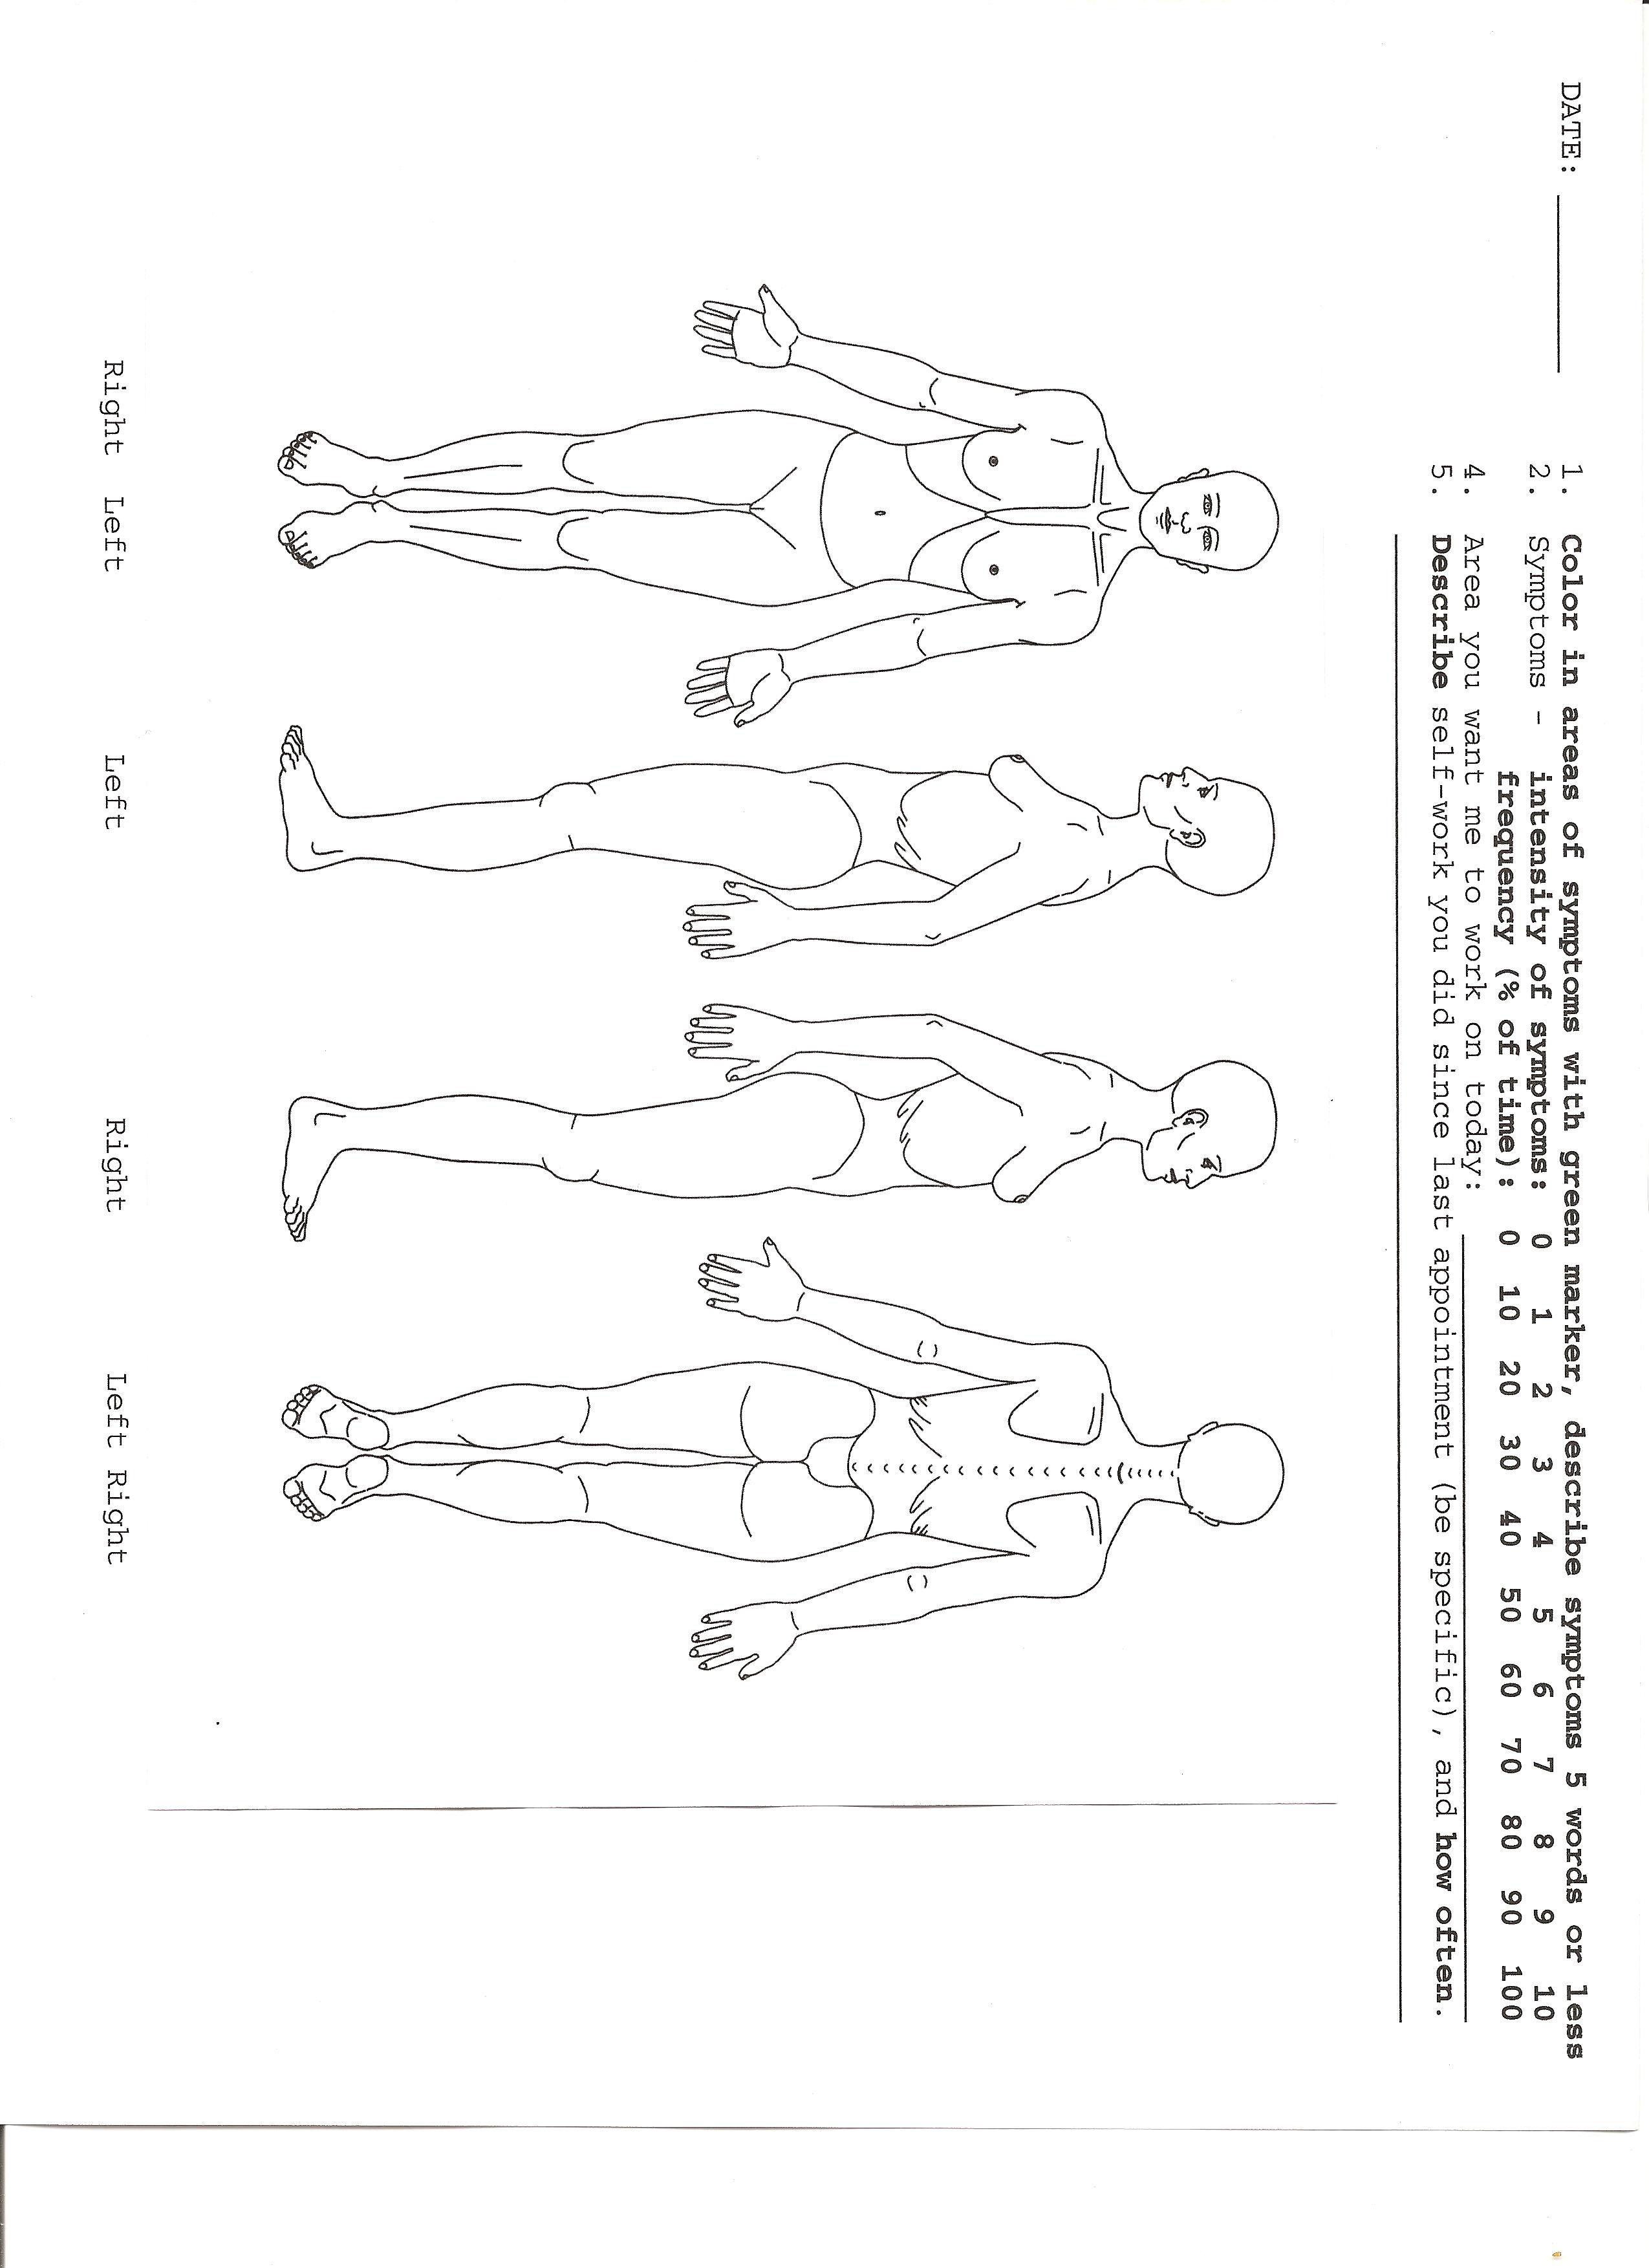 Blank Body Chart - FREE DOWNLOAD - Aashe